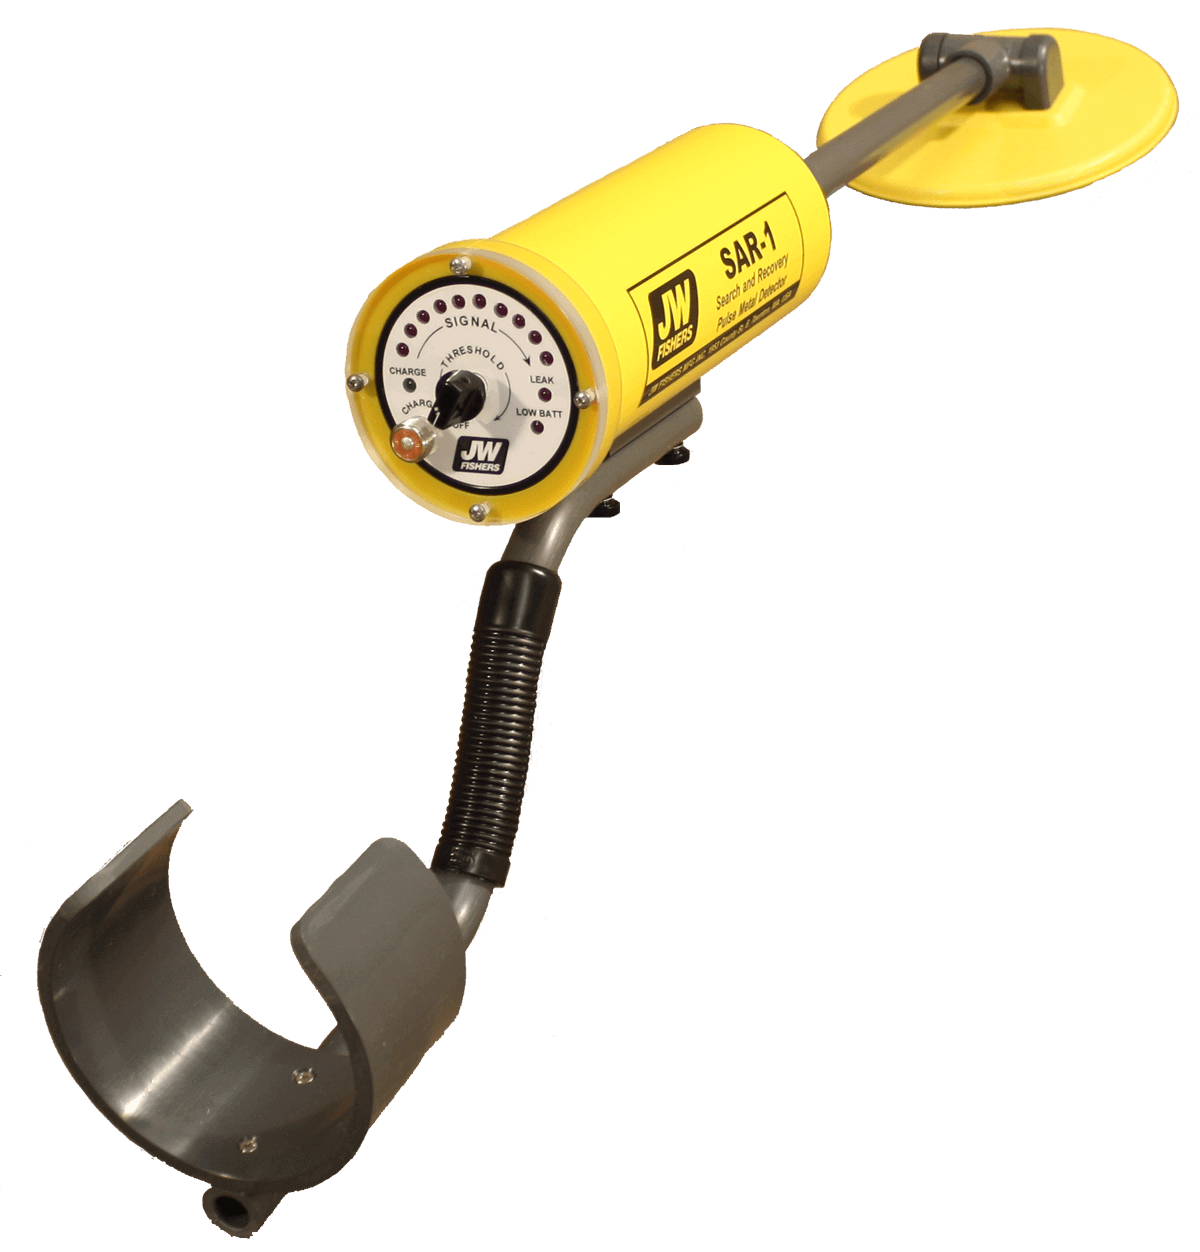 Search And Recovery Metal Detector (SAR)